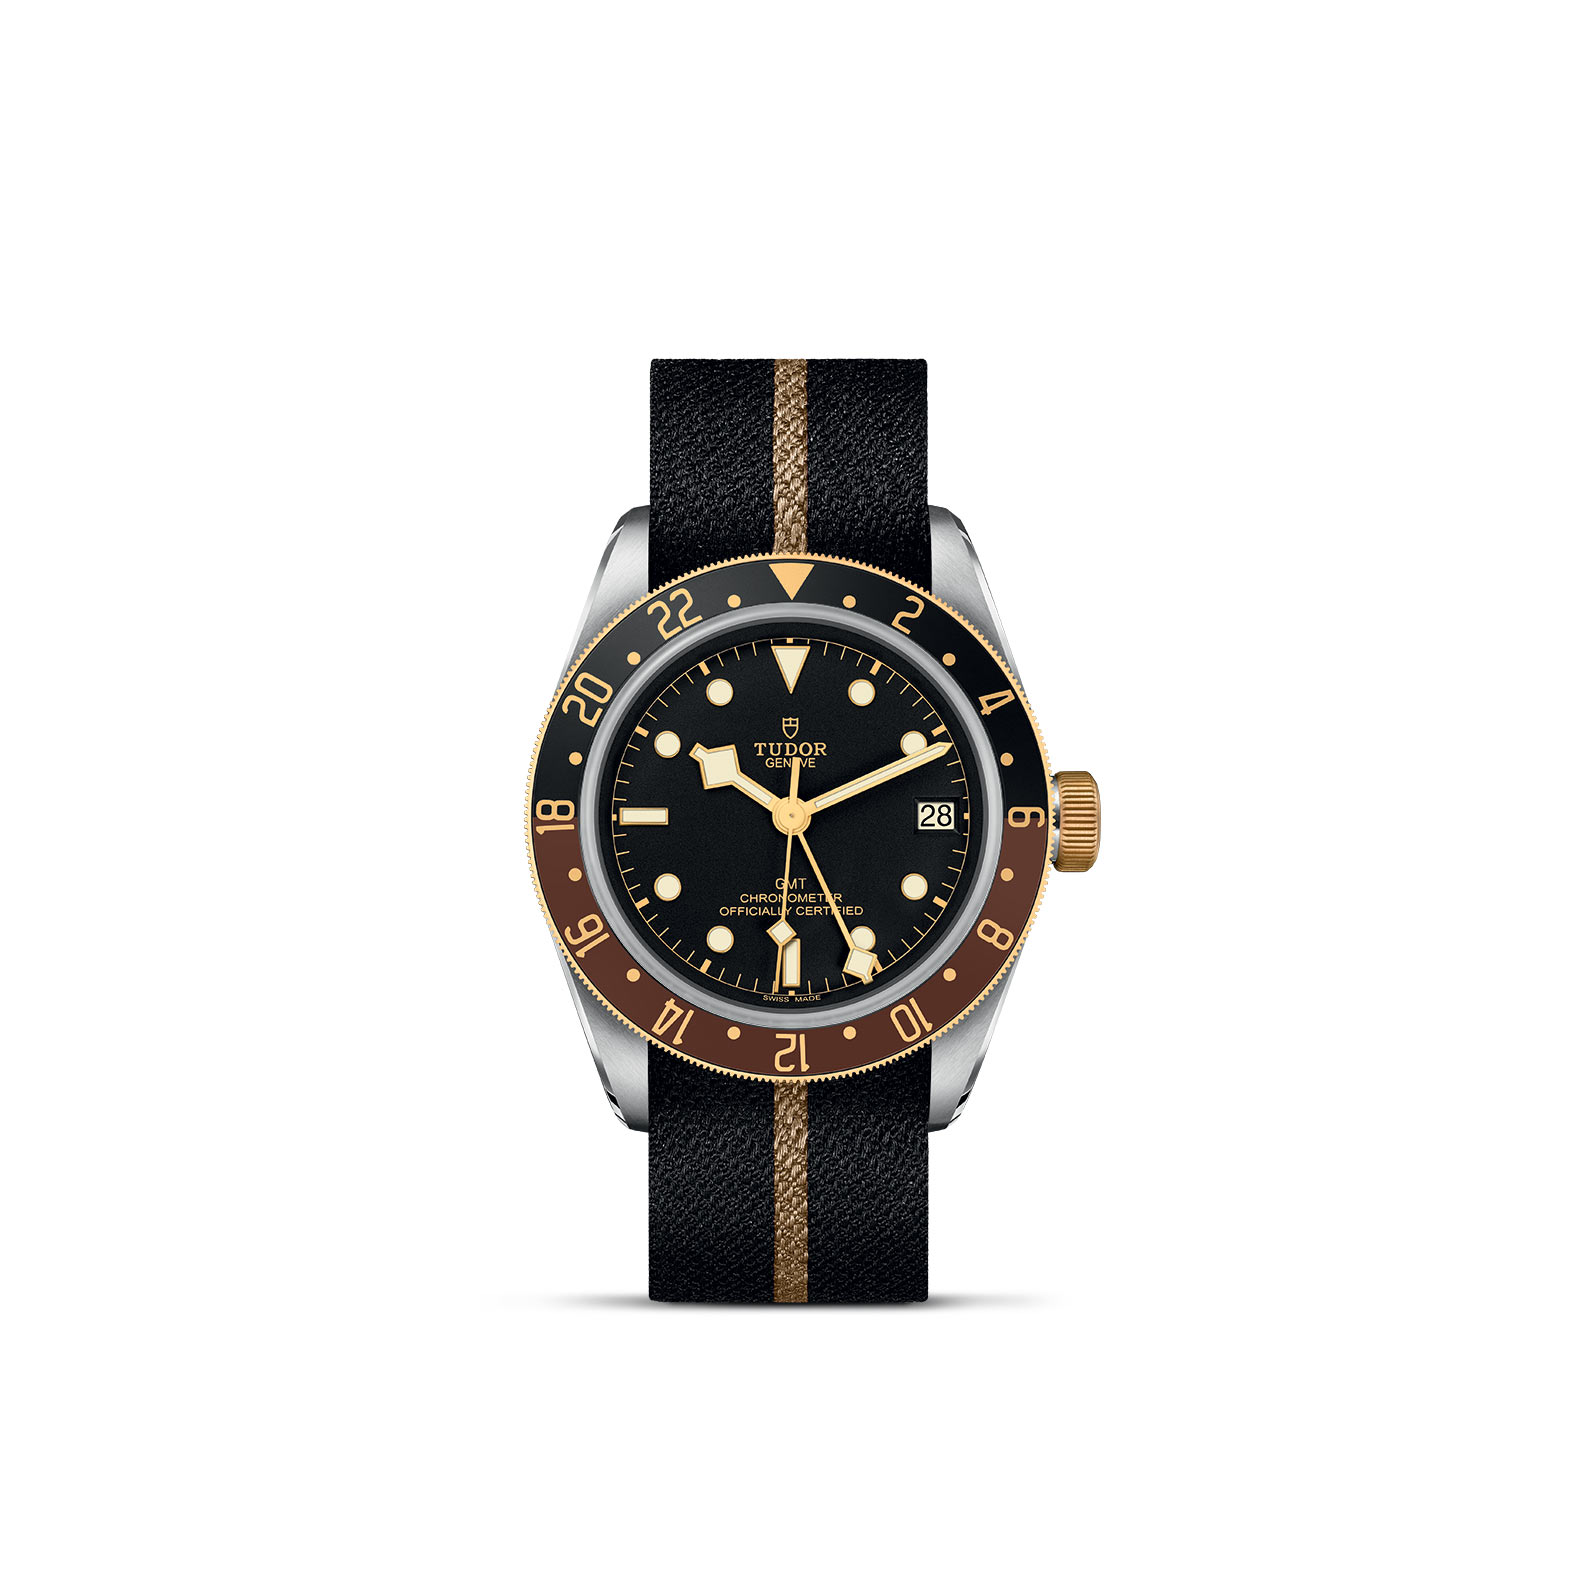 TUDOR BLACK BAY GMT standing upright, highlighting its classic design against a white background.